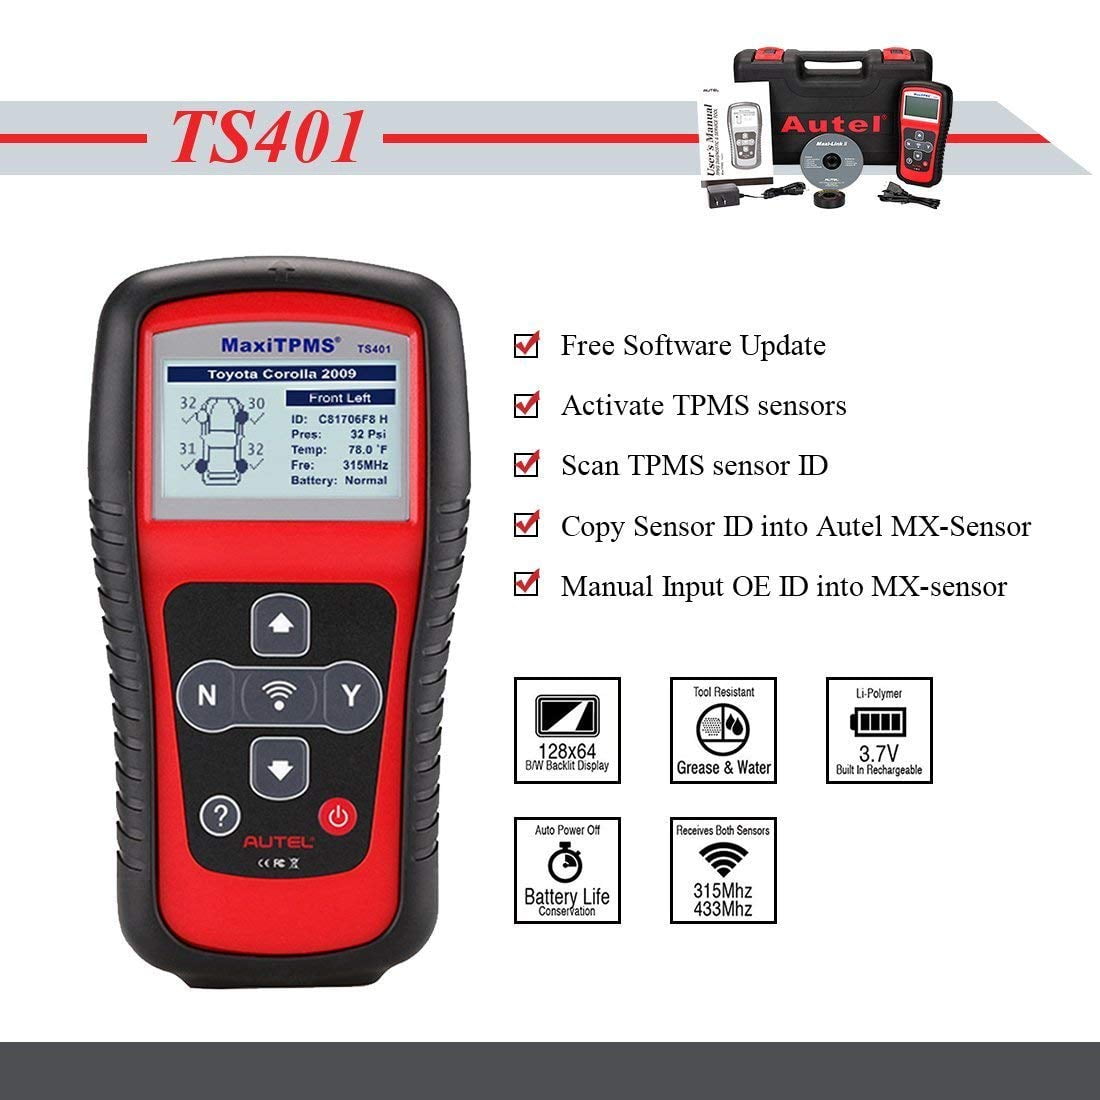 Autel TS401 TPMS Activation Tool Tire Pressure Monitor System Diagnostic Scanner 